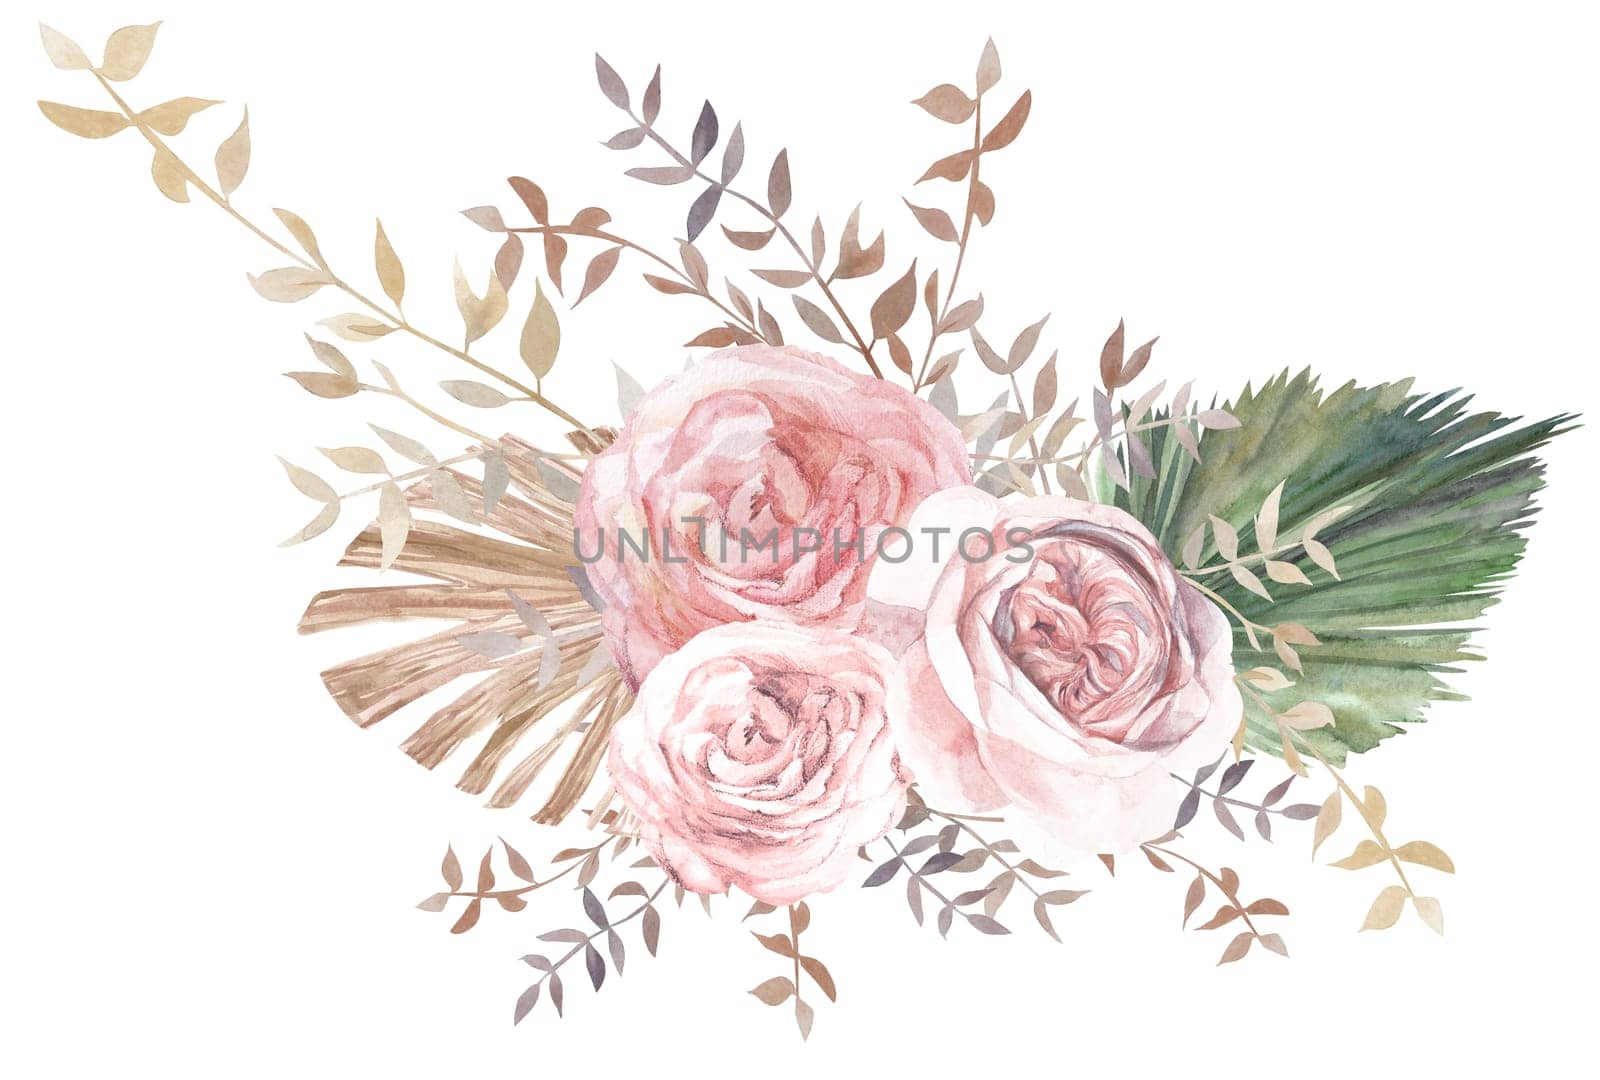 Watercolor horizontal illustration with a bouquet of flowers from light roses and dried flowers of palm leaves for postcards